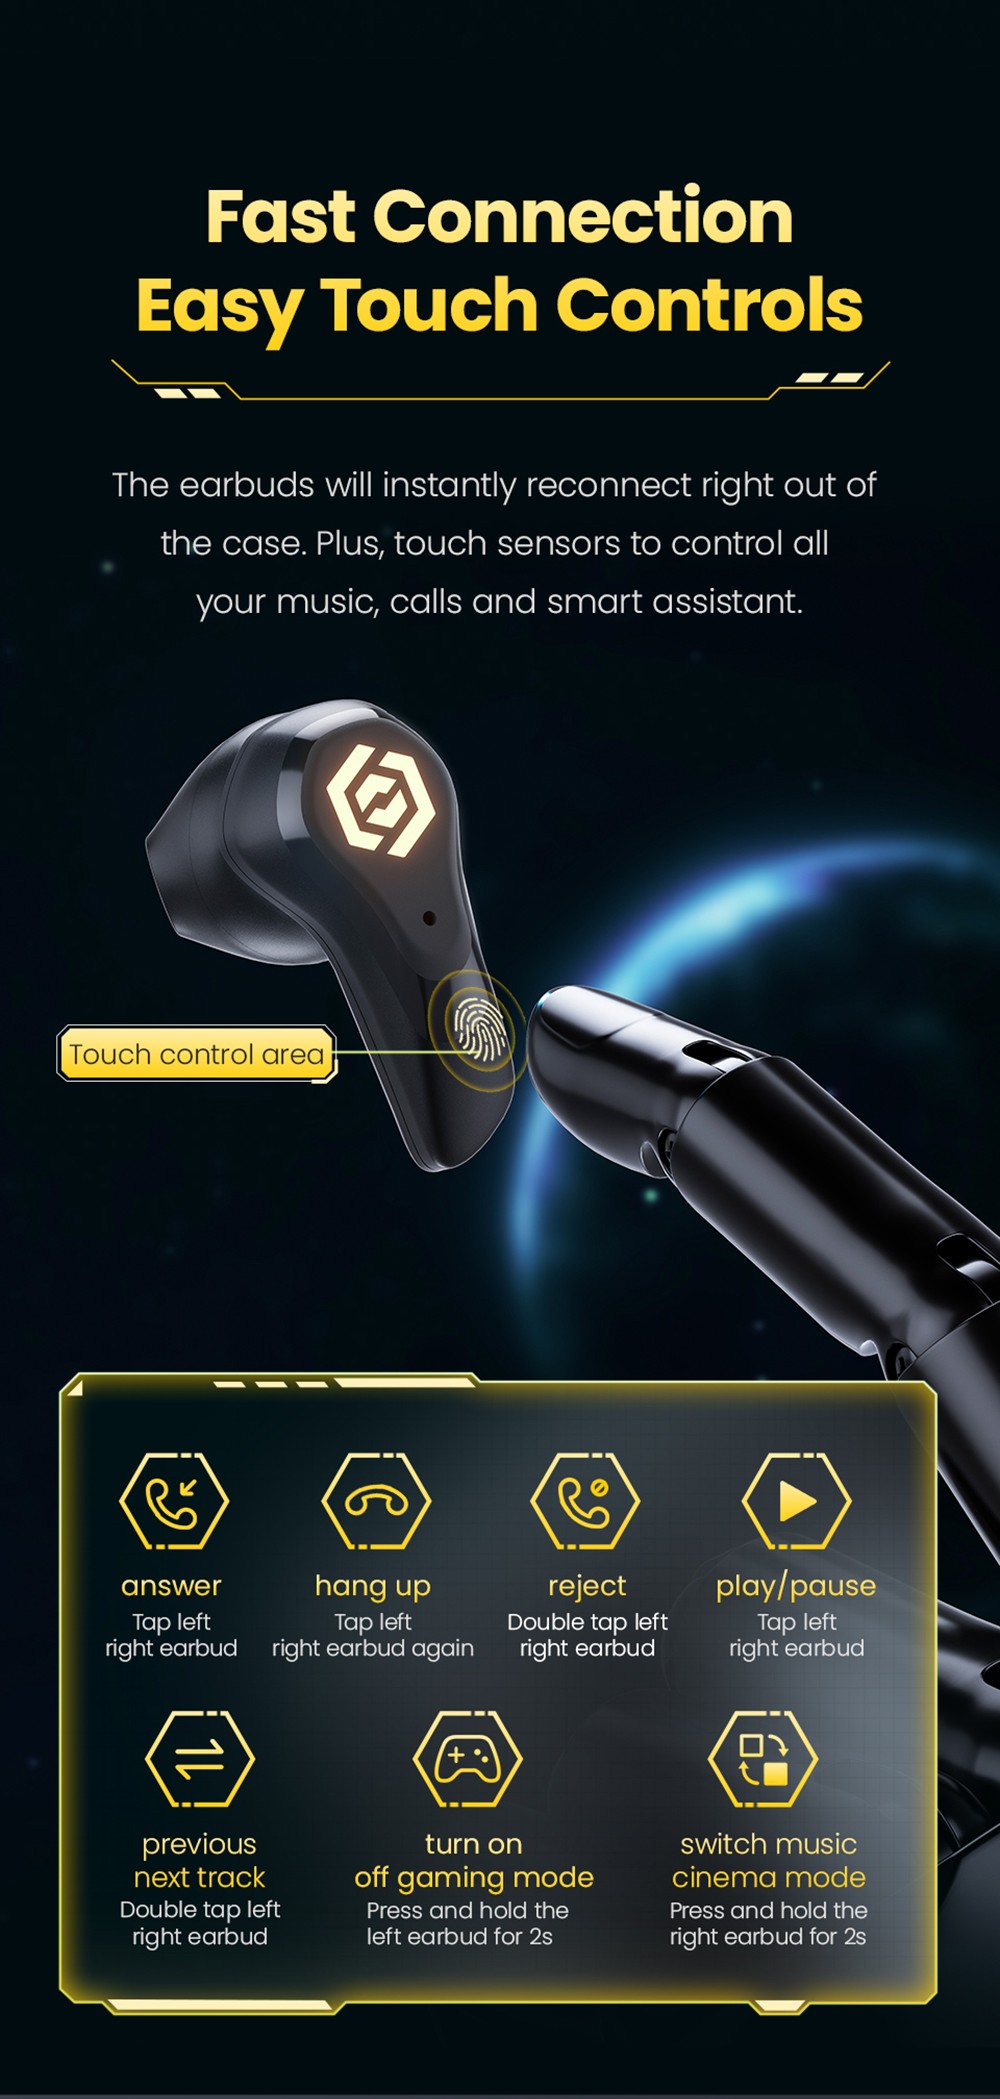 Haylou G3 TWS Earphone with RGB Light Professional Gaming Mode HD Voice Call Live Sound Quality